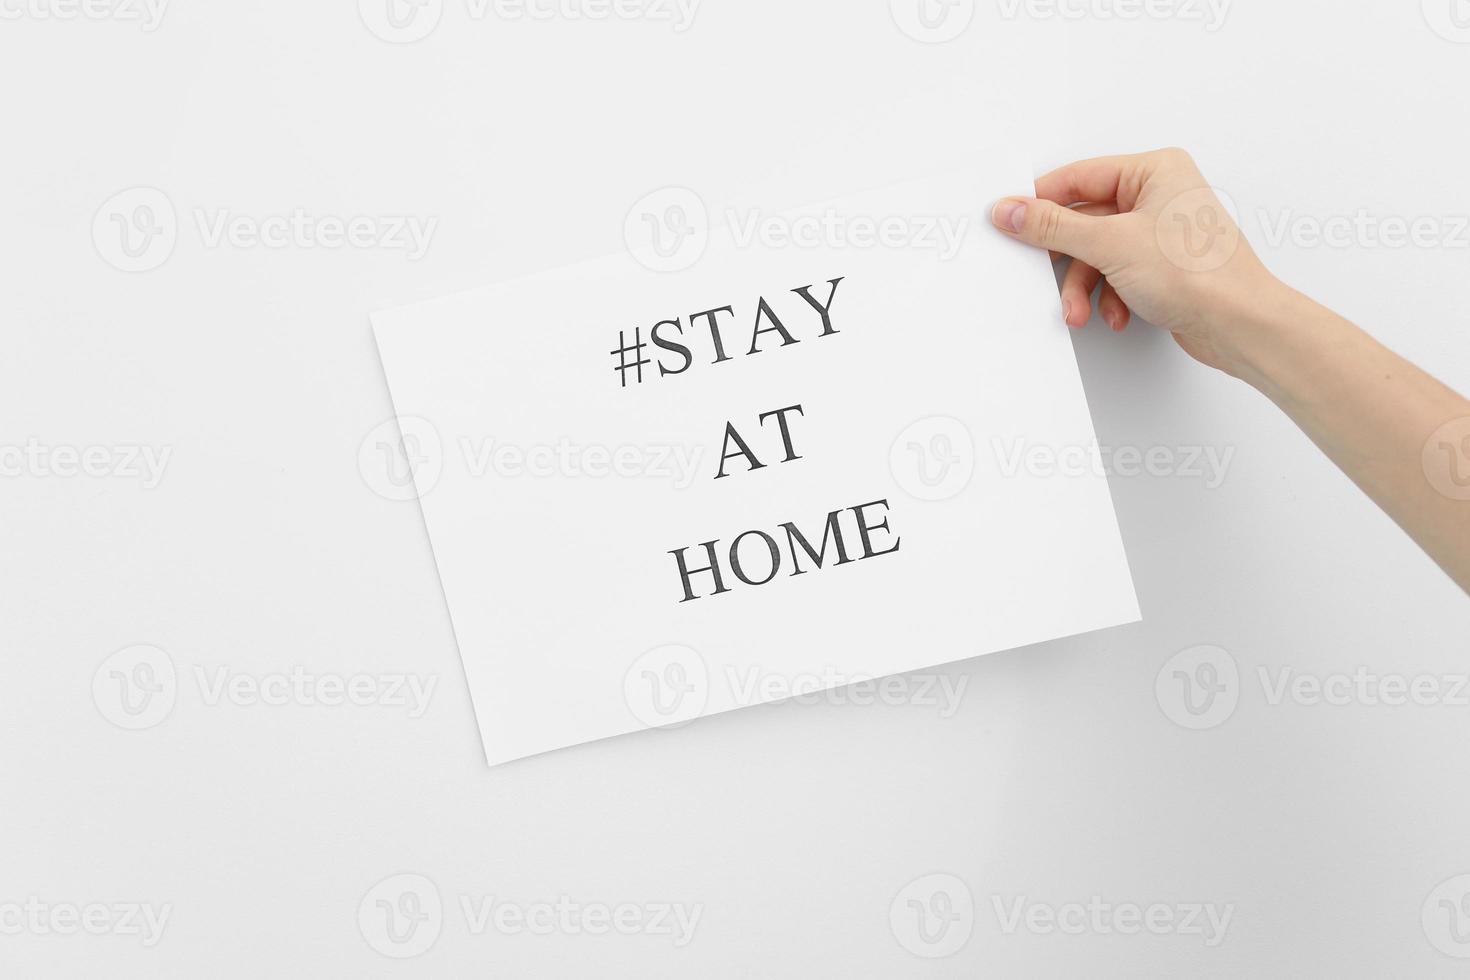 stay at home concept. woman hand holding paper with words stay at home isolated on white background. Coronavirus, COVID-19, self-quarantine, isolation photo